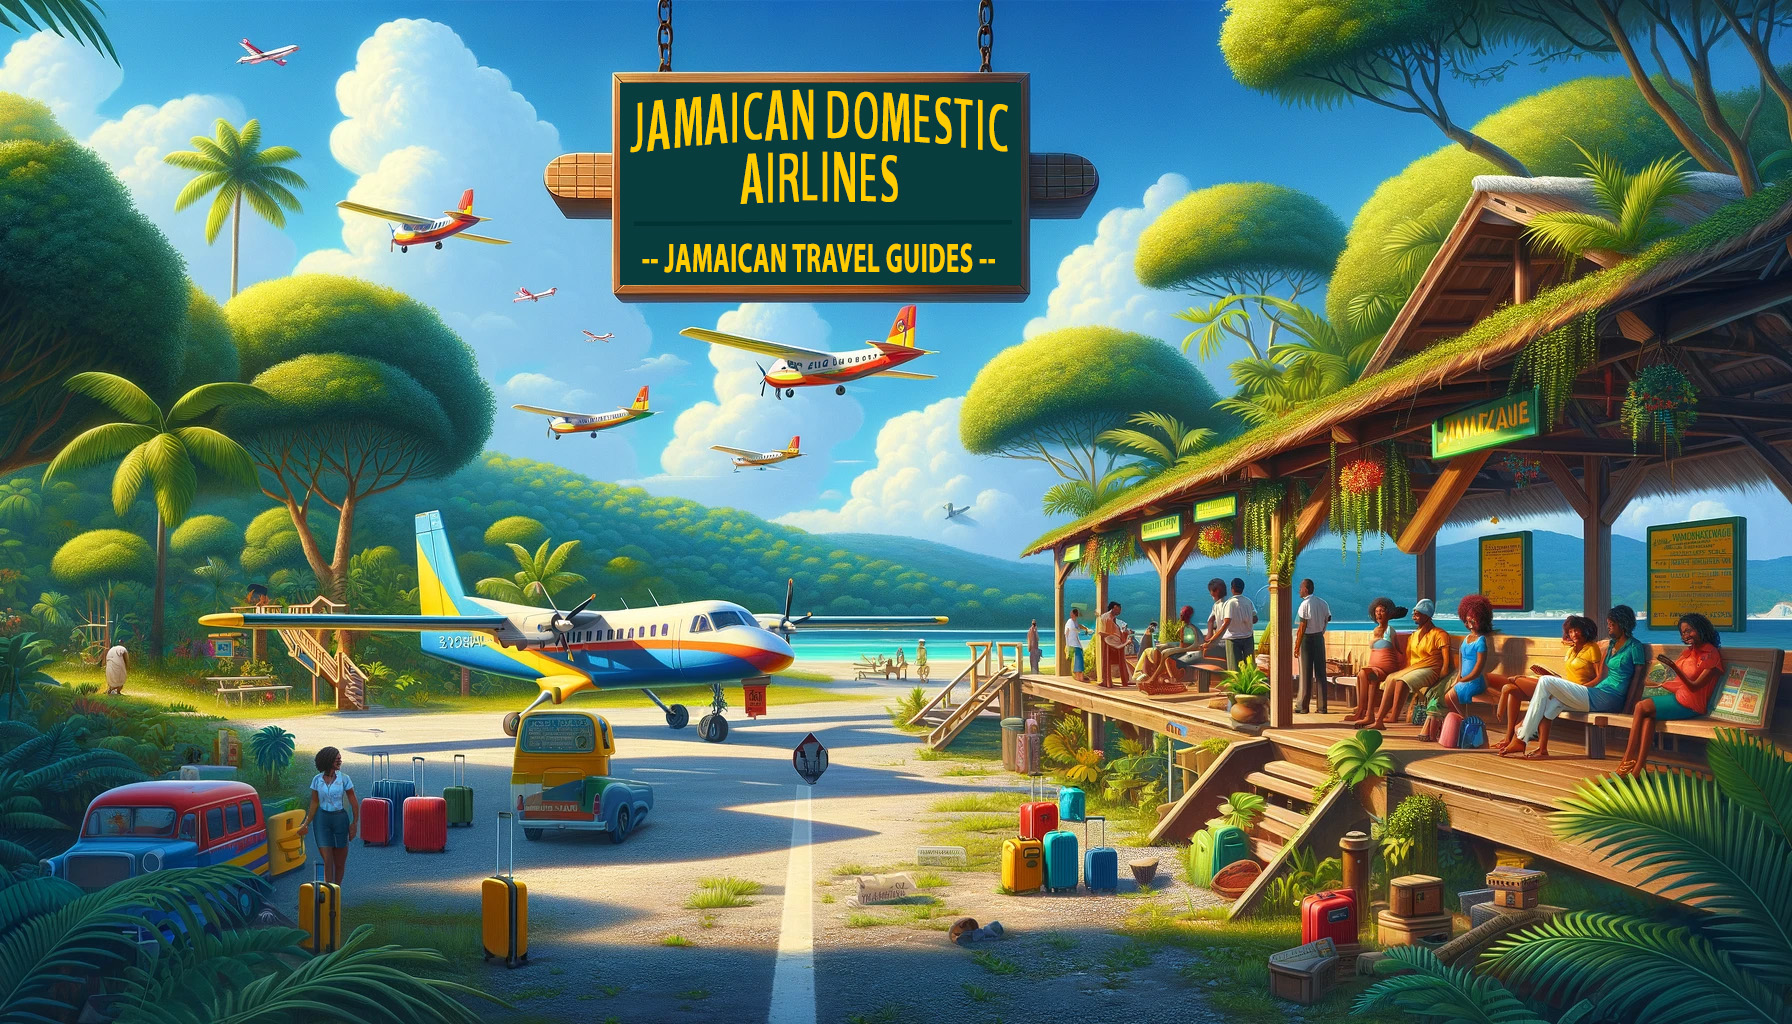 Jamaican Domestic Airlines - Jamaican Travel Guides